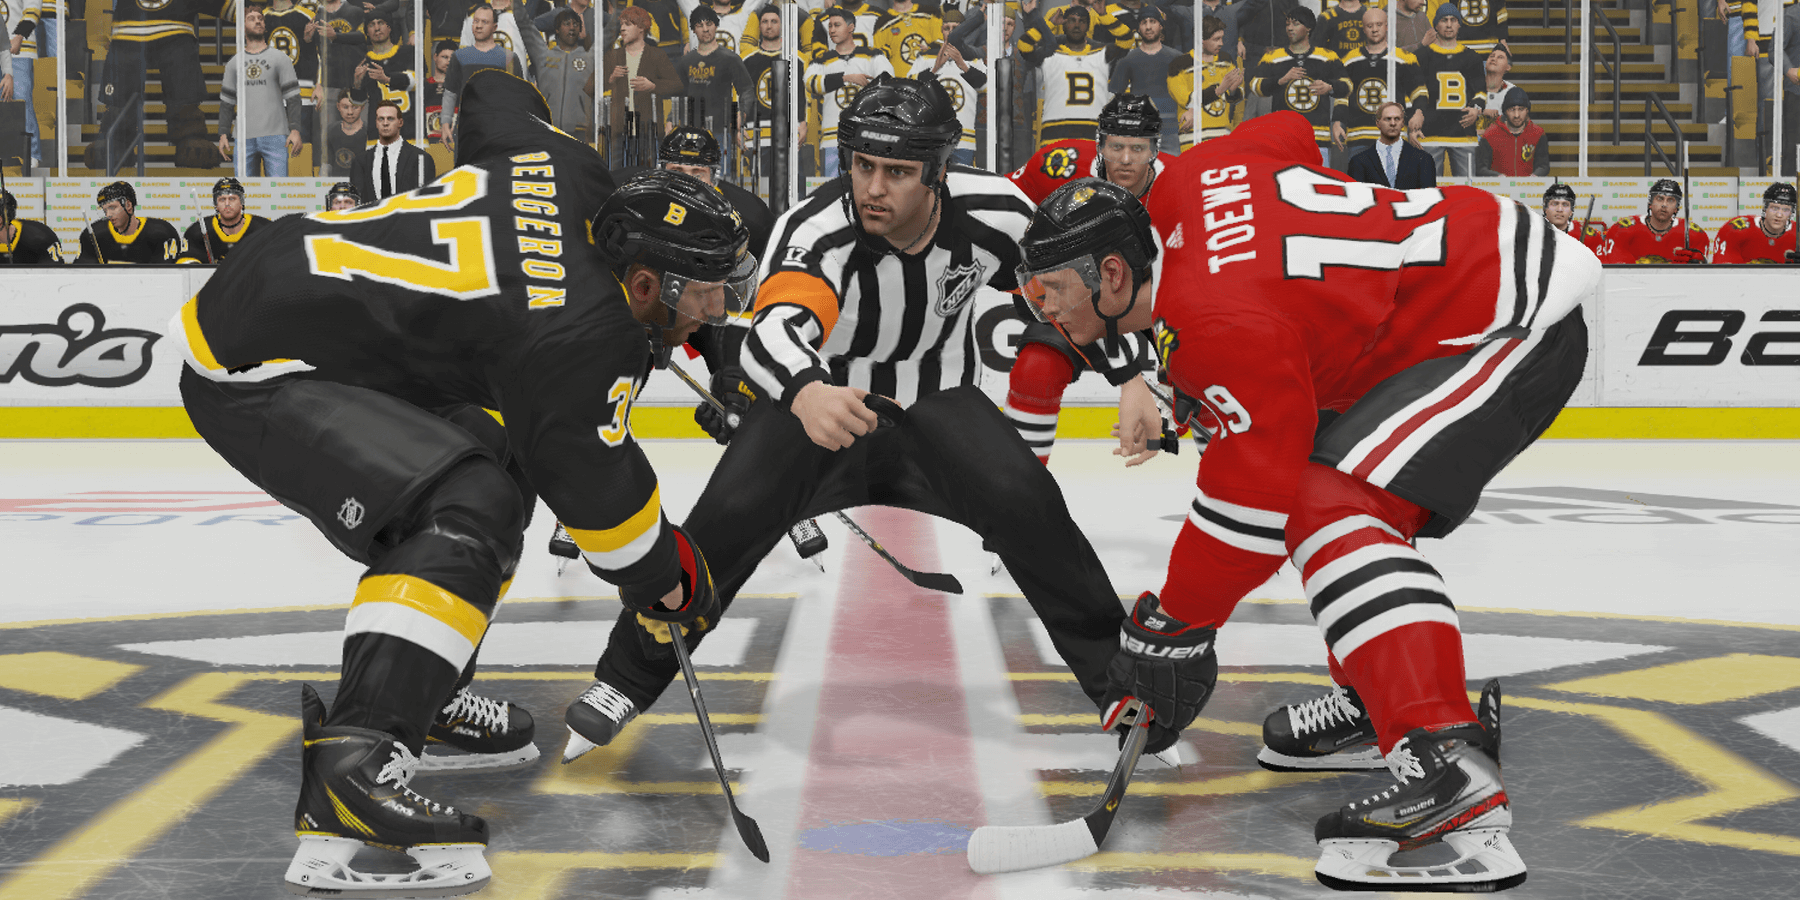 Patrice Bergeron in a faceoff in NHL 21